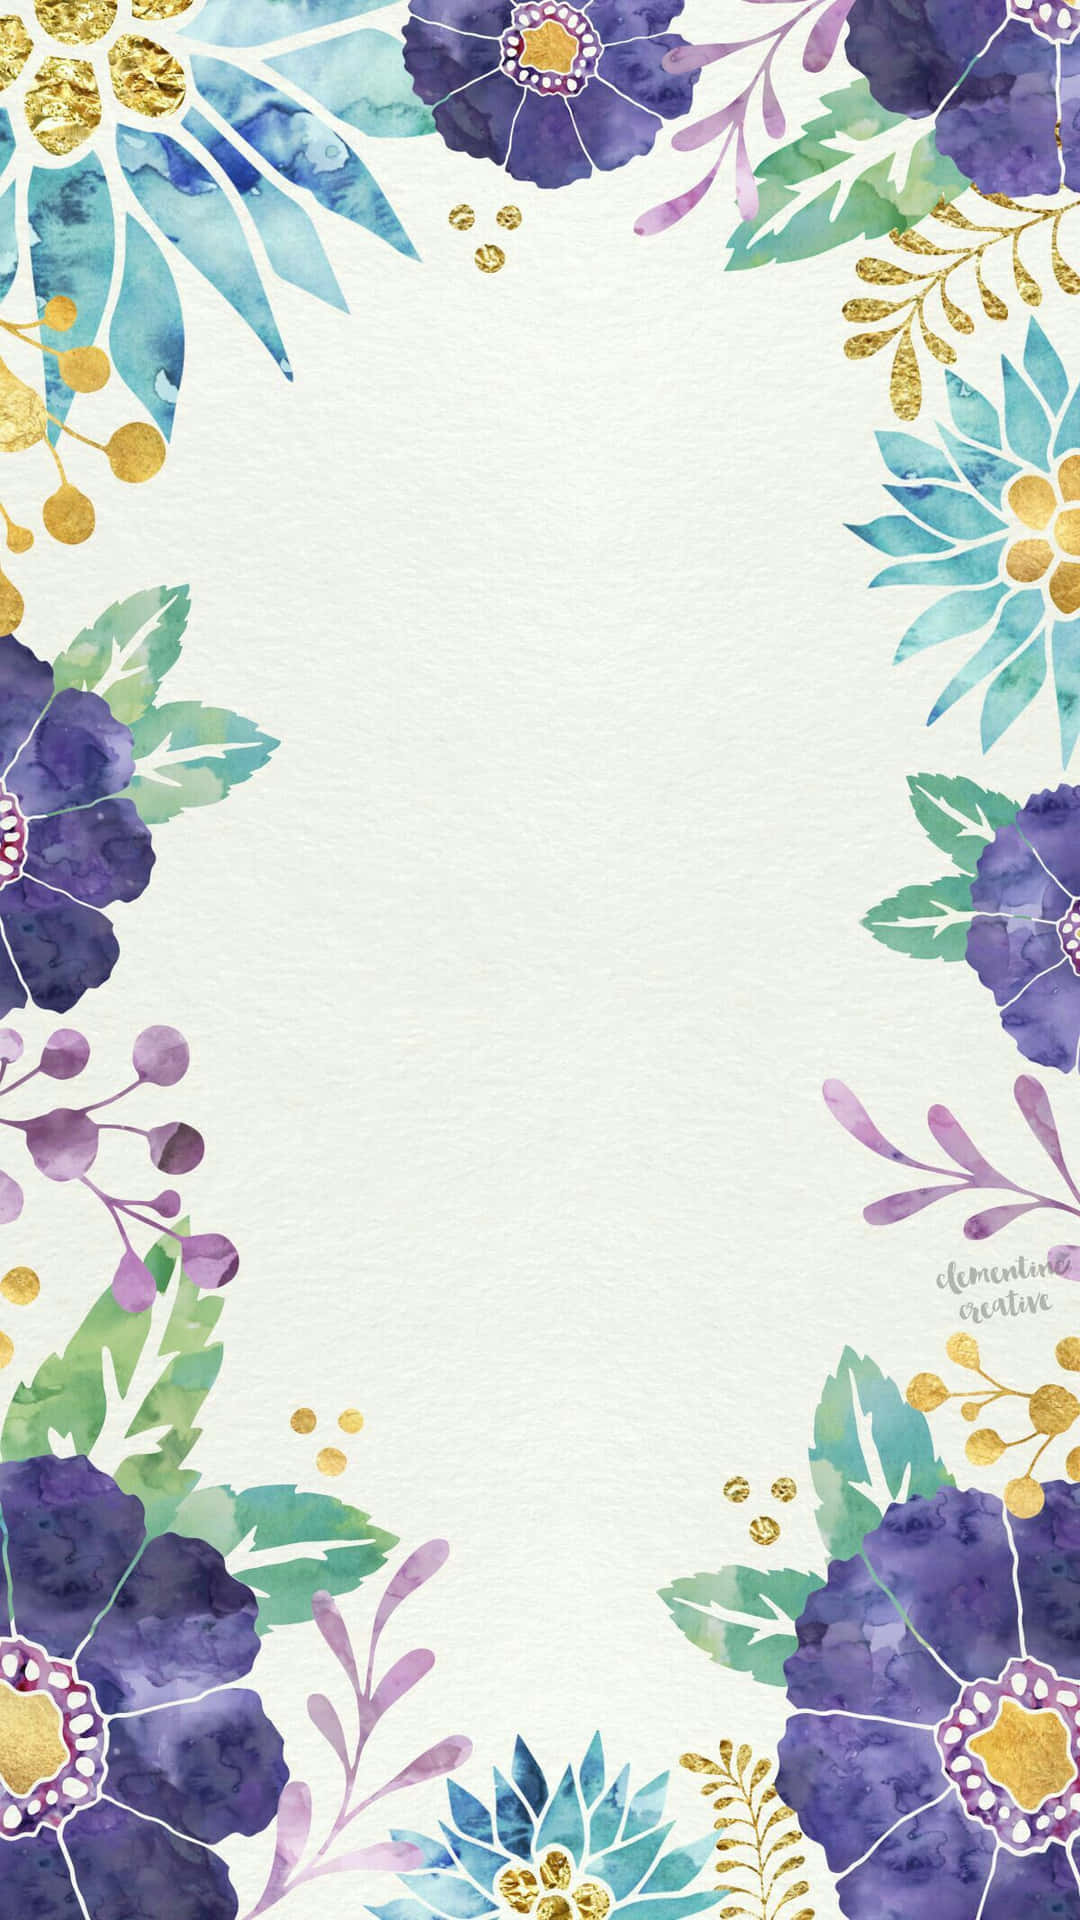 Beautiful Blossoms - An Aesthetic Watercolor Floral Background